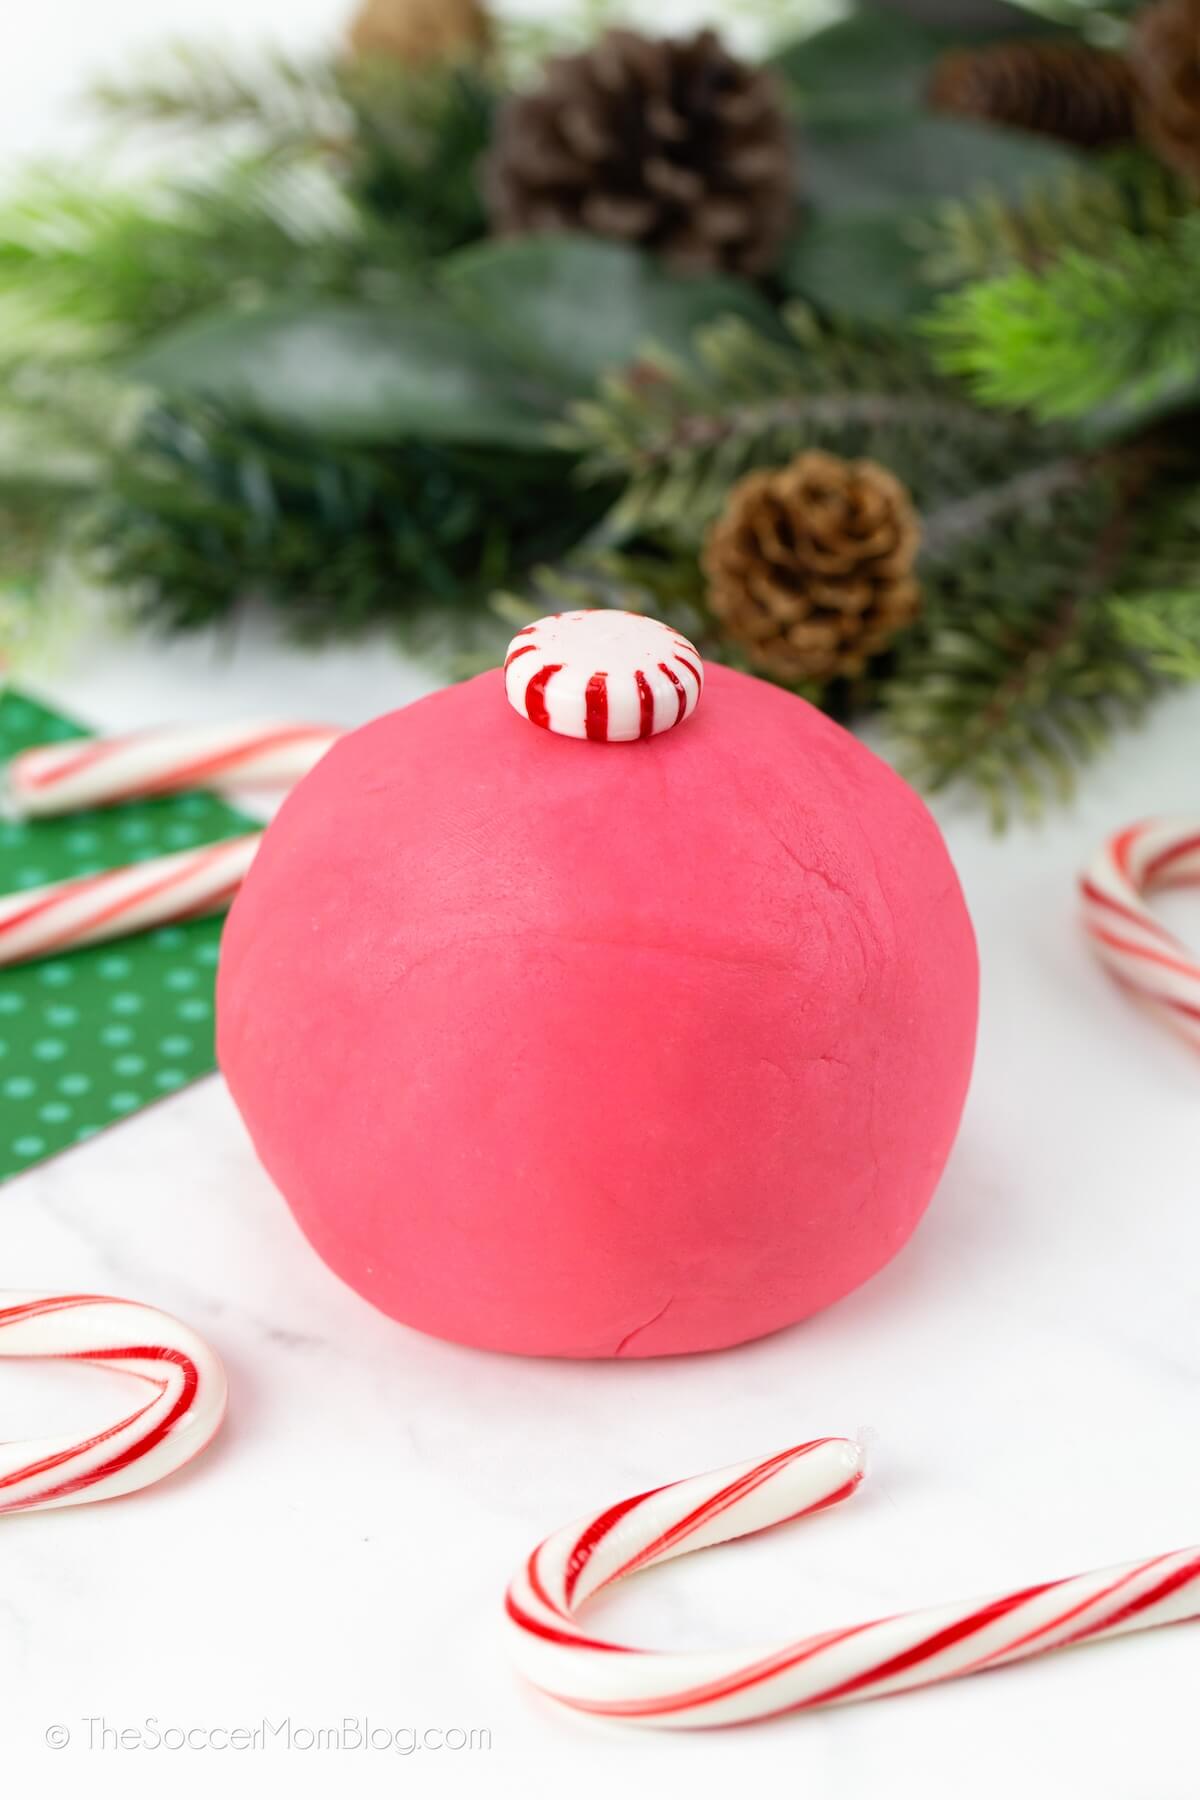 ball of peppermint playdough with mint on top